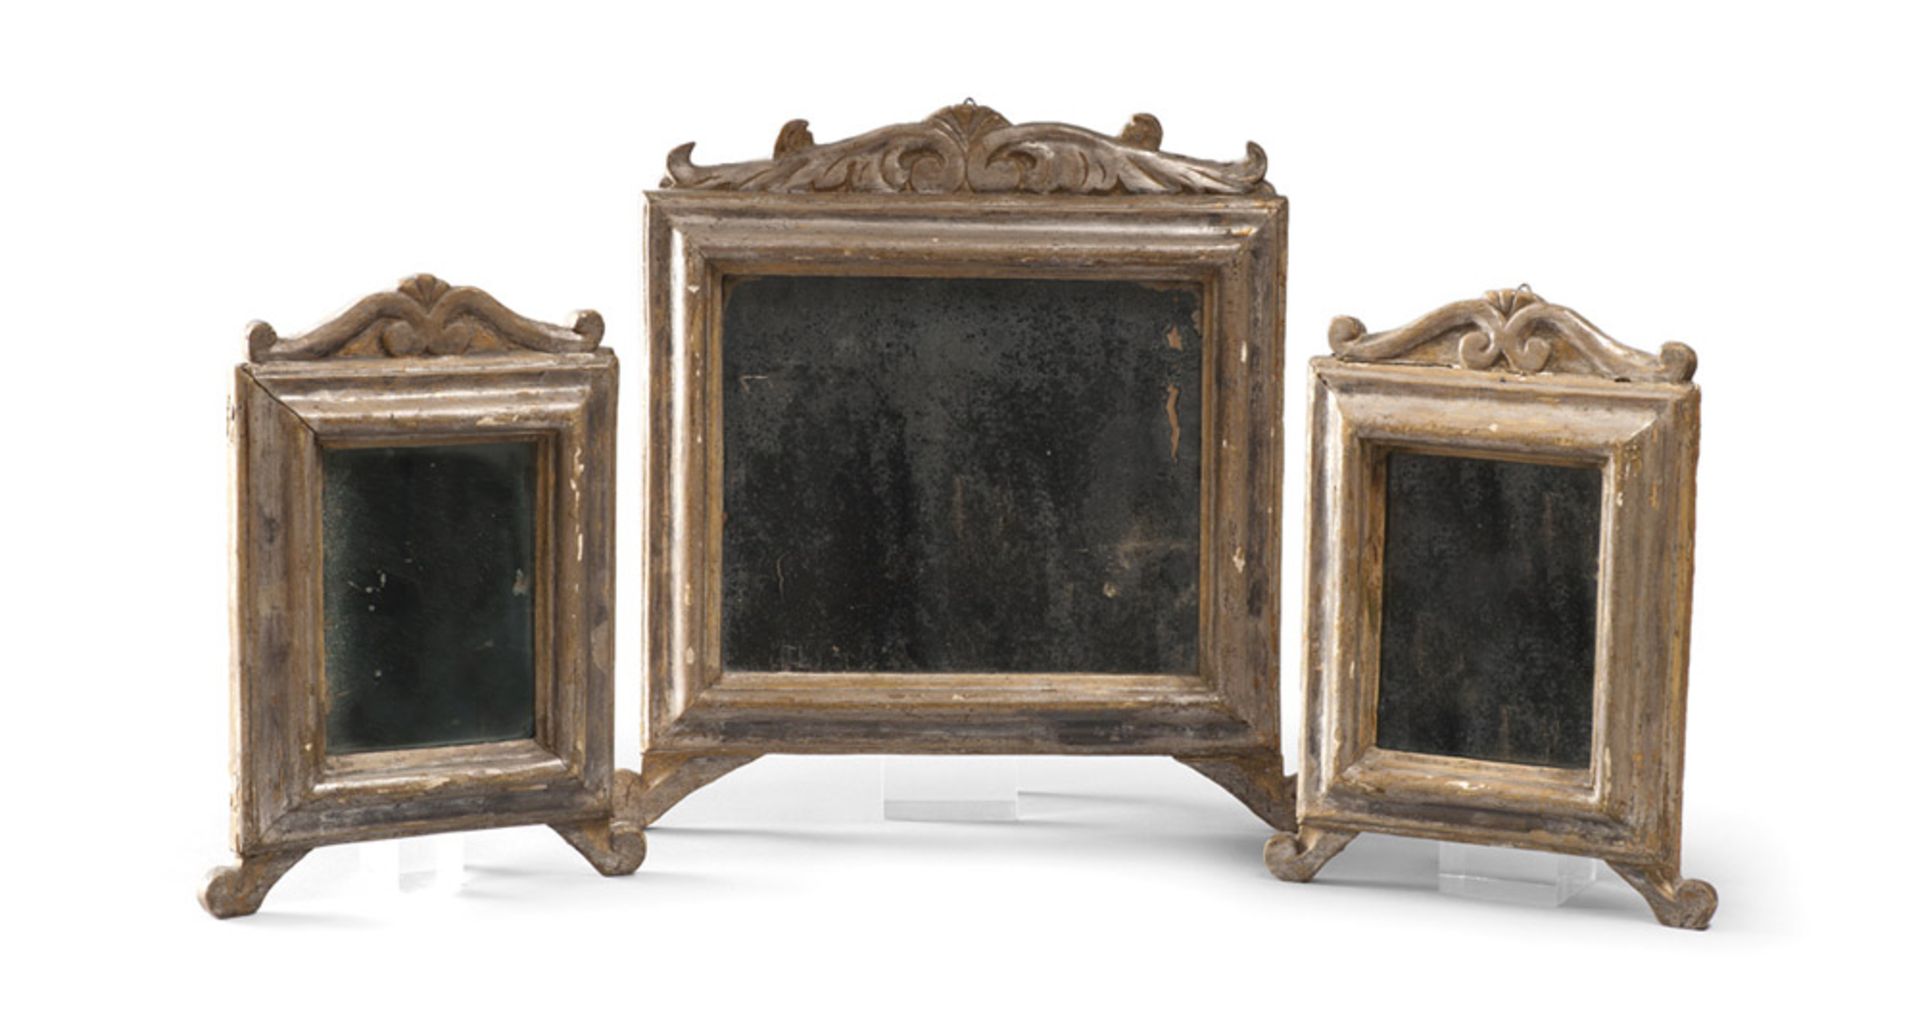 SILVER-PLATED WOOD TRIPTYCH, EARLY 19TH CENTURY